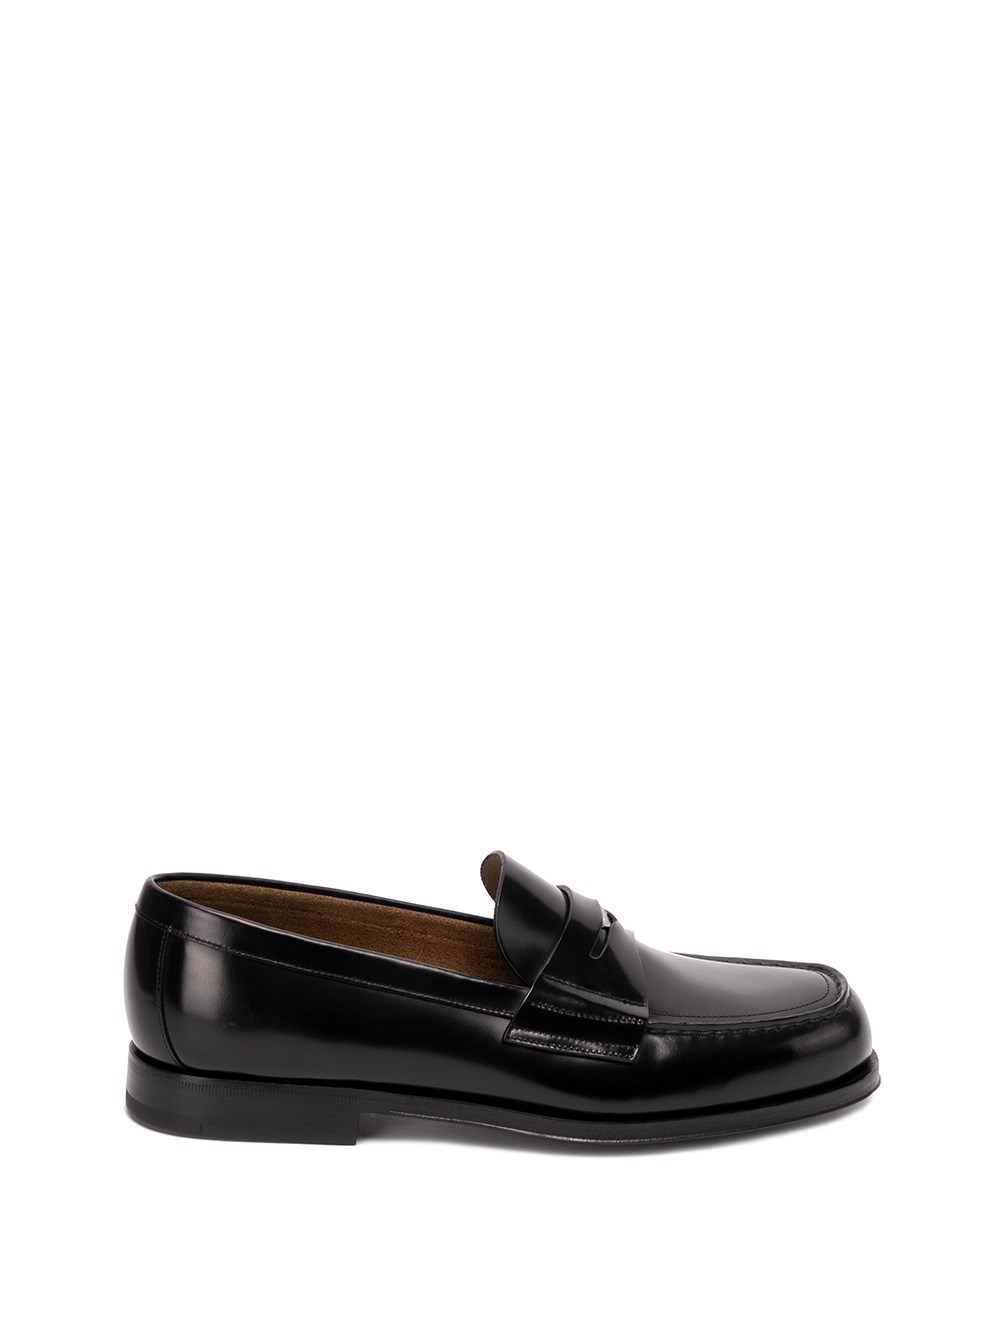 Prada Brushed Leather Loafers In Black  